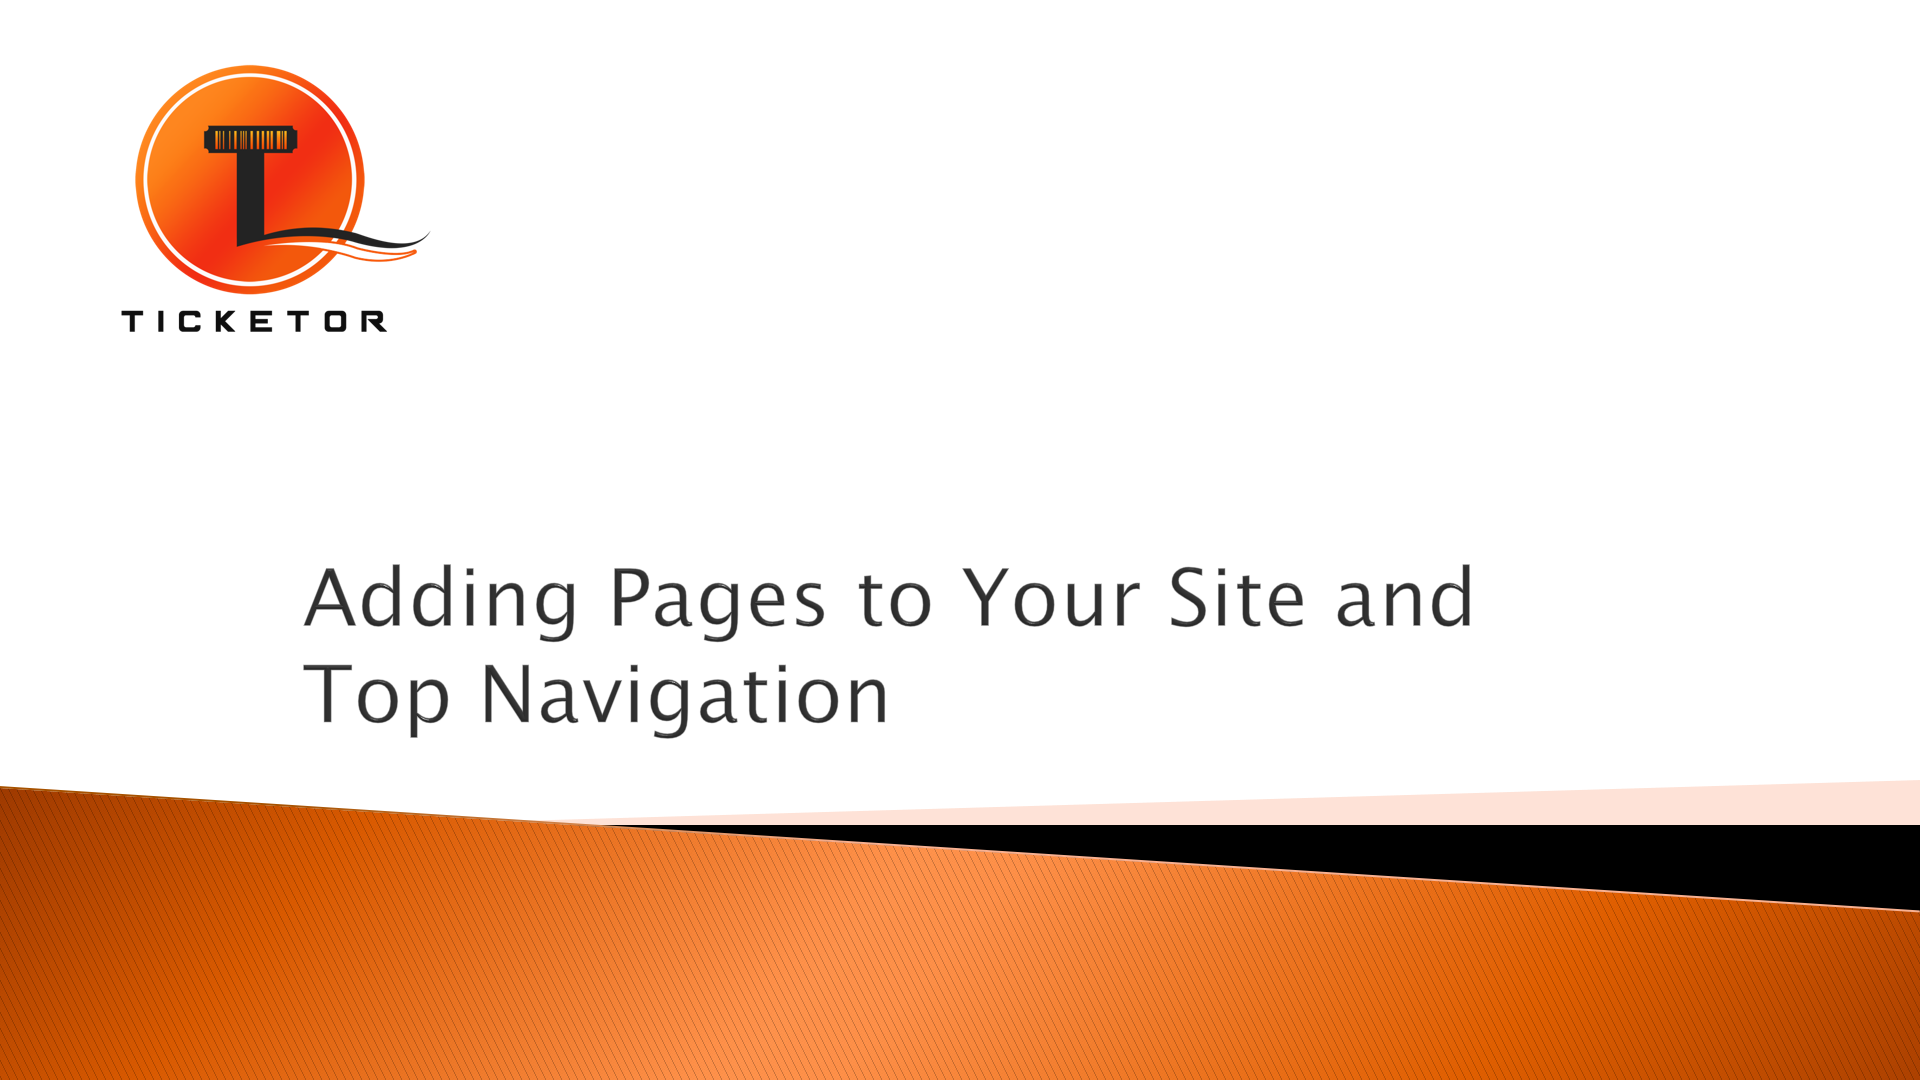 Adding Content and Pages to Your Site and Top Navigation